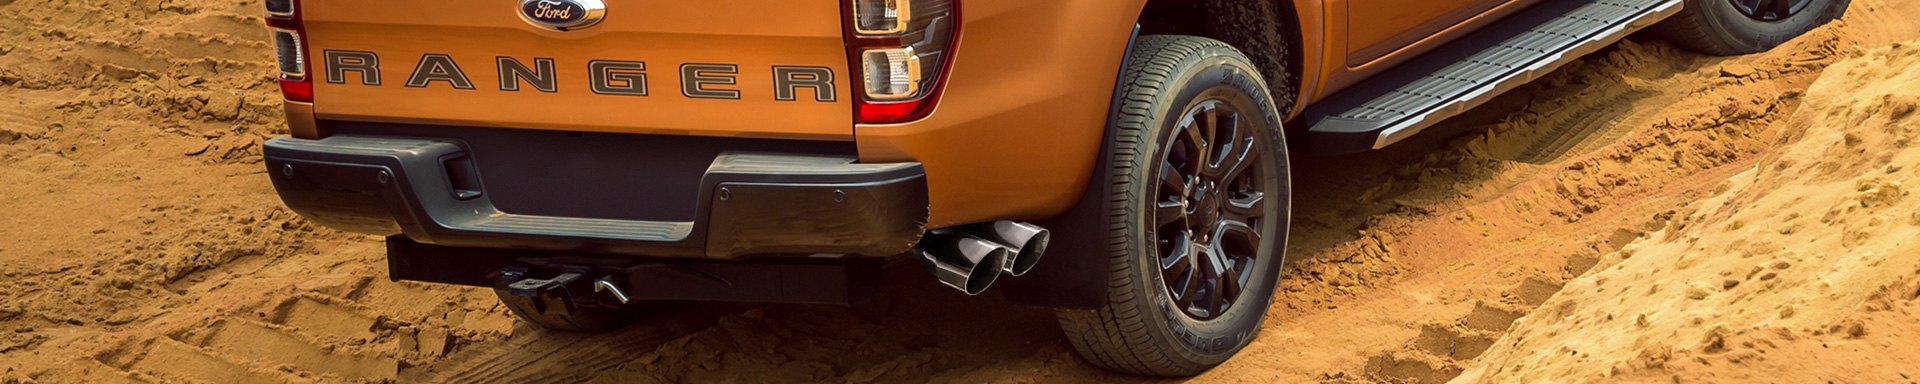 Get More Power For Your Ford Ranger With New ROUSH Performance Exhaust